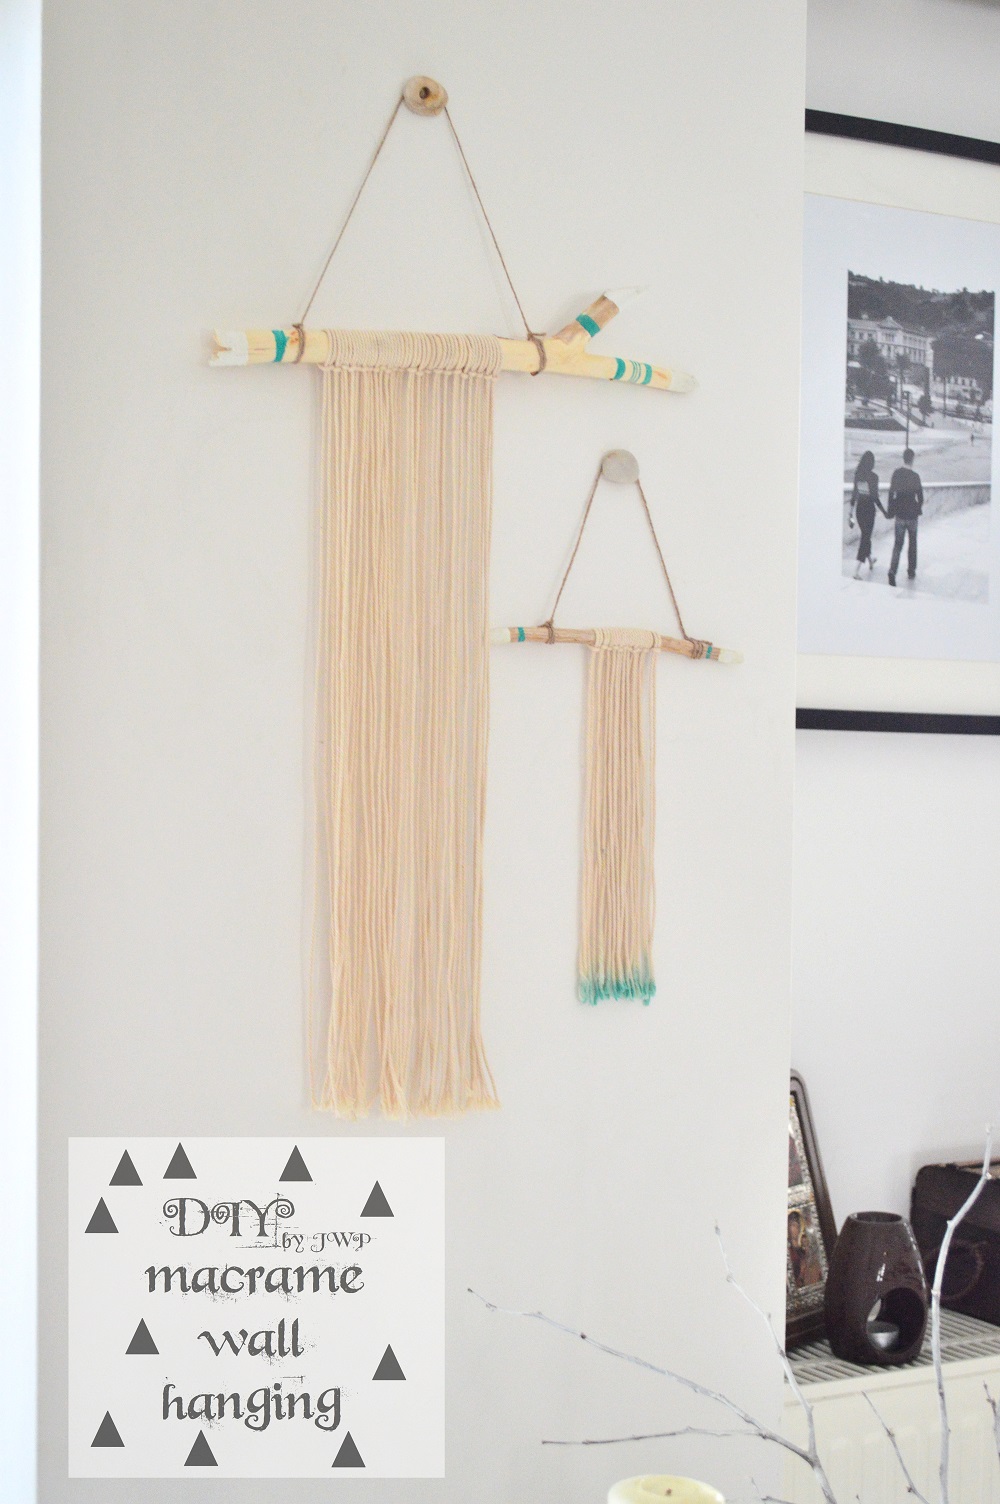 Macrame wall hanging - www.findawaybyjwp.blogspot.gr CSC_0960